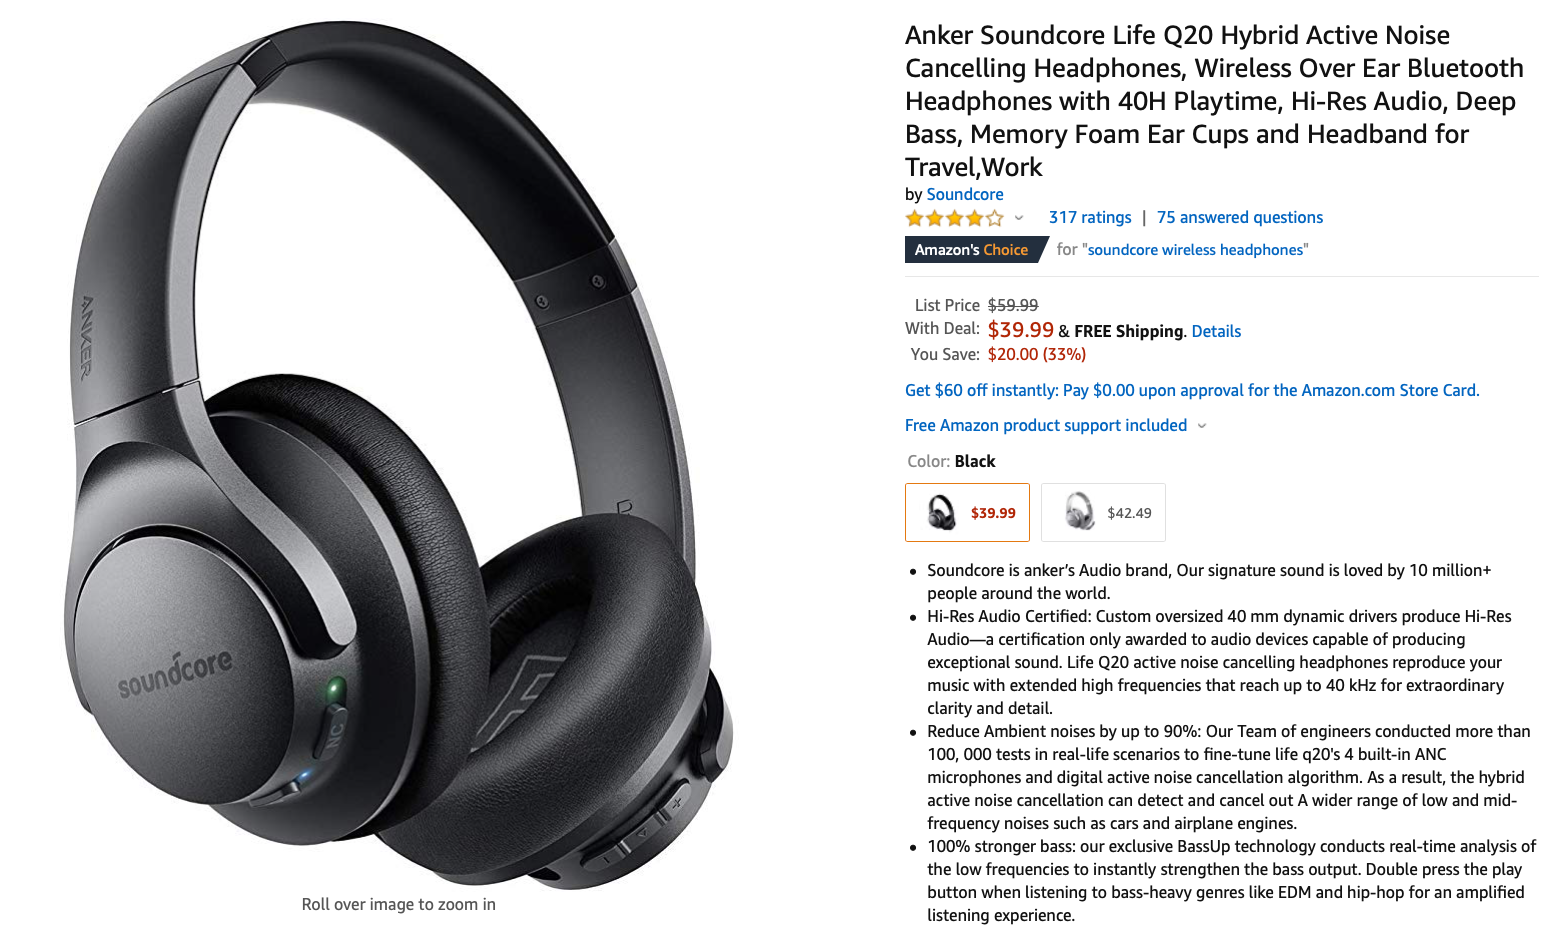 Anker Soundcore Life Q20 Hybrid Active Noise Cancelling Headphones,  Wireless Over Ear Bluetooth Headphones, 40H Playtime, Hi-Res Audio, Deep  Bass